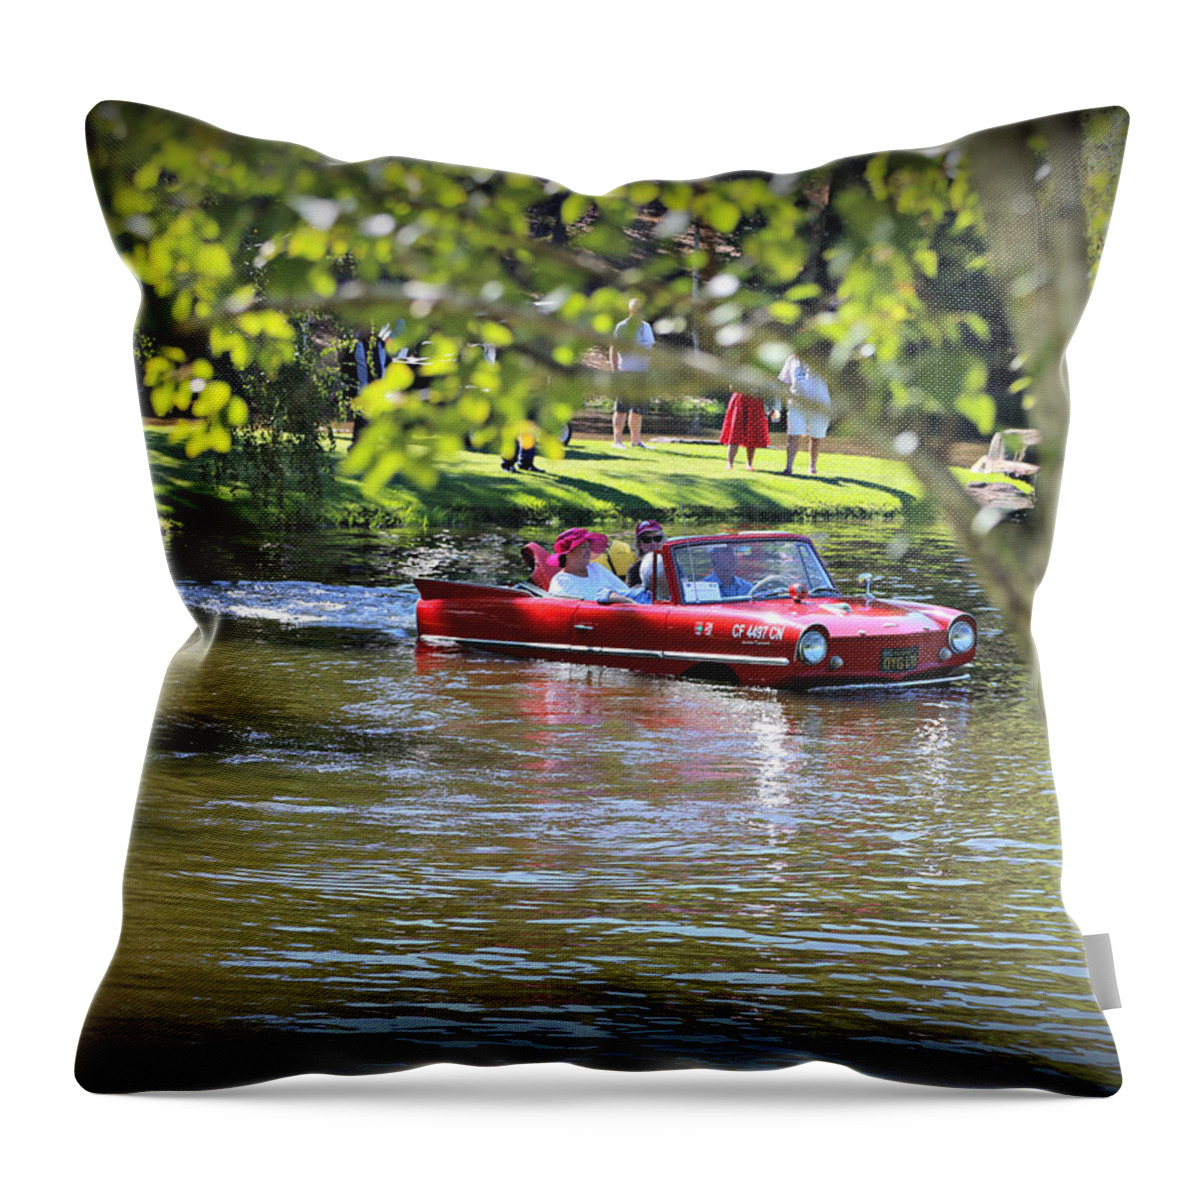 Amphicar Throw Pillow featuring the photograph Amphicar Swimming by Steve Natale